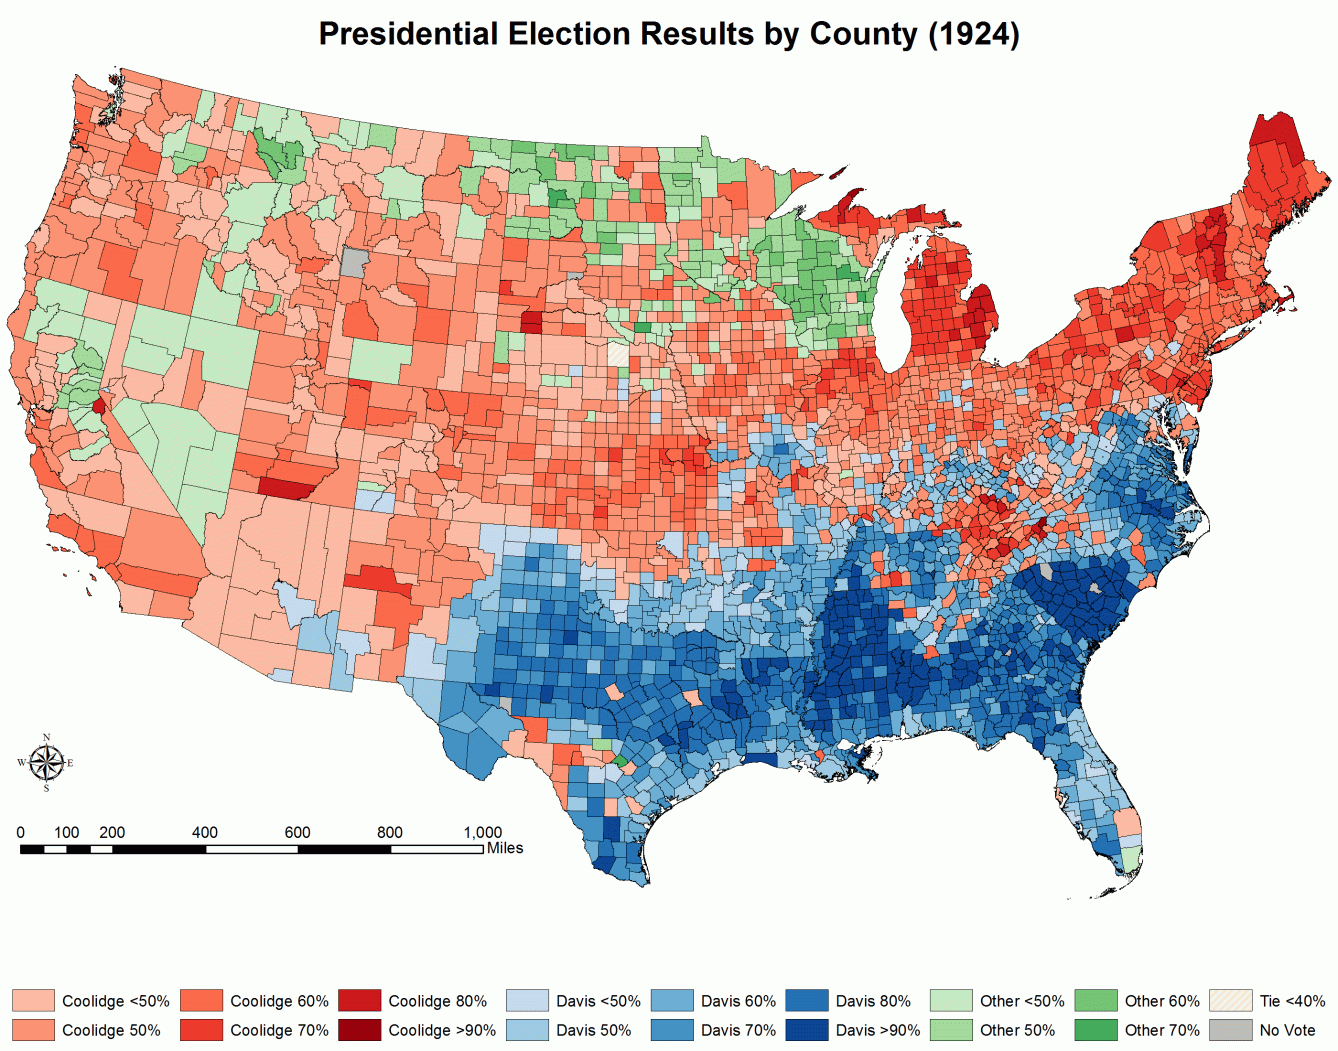 Presidential Election of 1924 by county, showing Coolidge's very impressive support across the country. Securing 54% of the popular and 382 electoral votes to 136 (for Democrat Davis) and 13 (for Progressive La Follette), Coolidge shattered the conventional wisdom that he was both "unelectable" beyond Massachusetts and incapable of prevailing in a three-way race nationally. No one has ever done that before or since without throwing the election into the House (1824) or losing to the Democrat opponent (1912, 1992). 